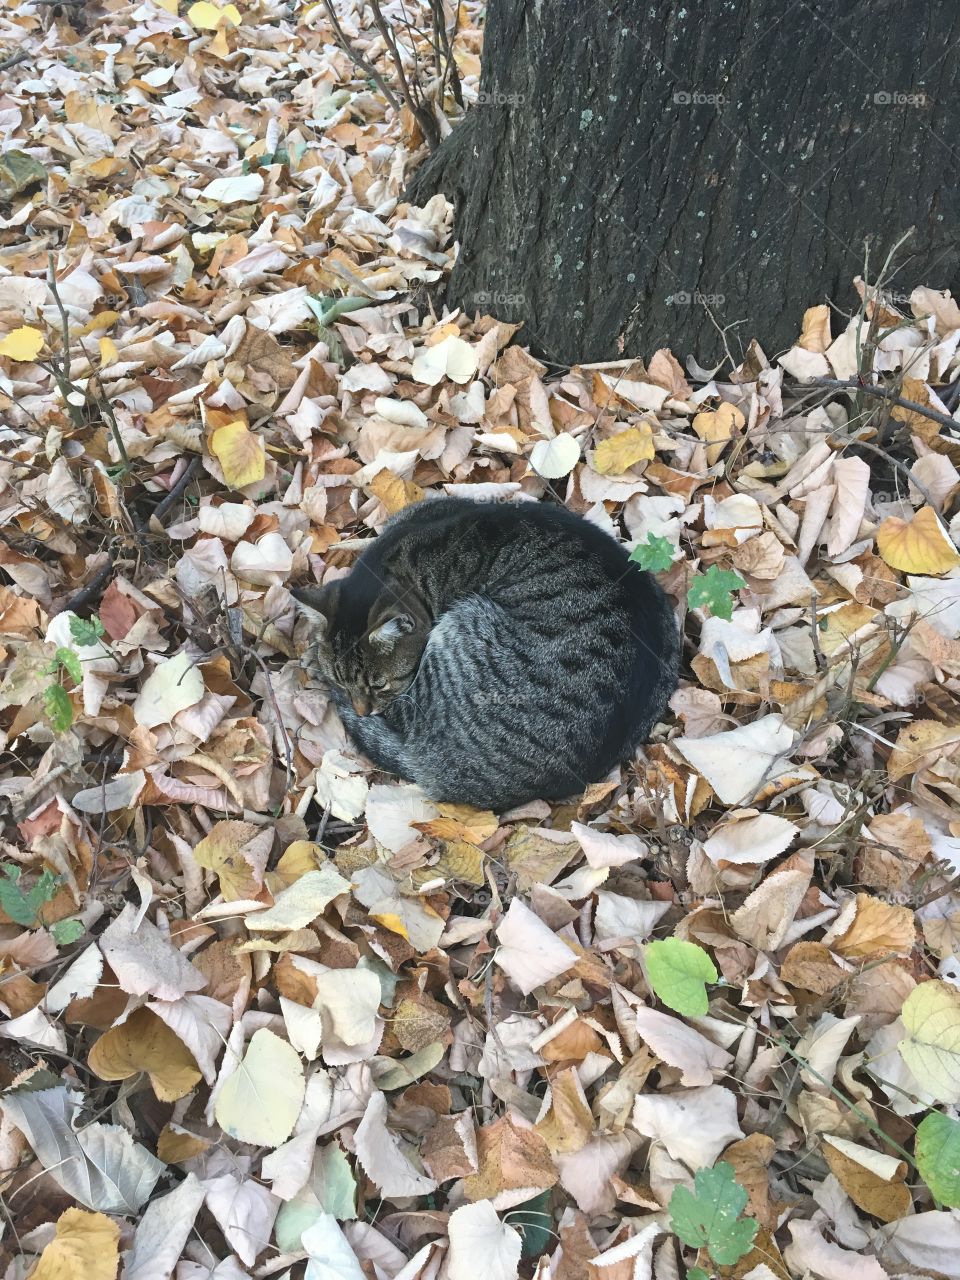 Dark-gray curled-up cat near a tree in yellow autumn leaves